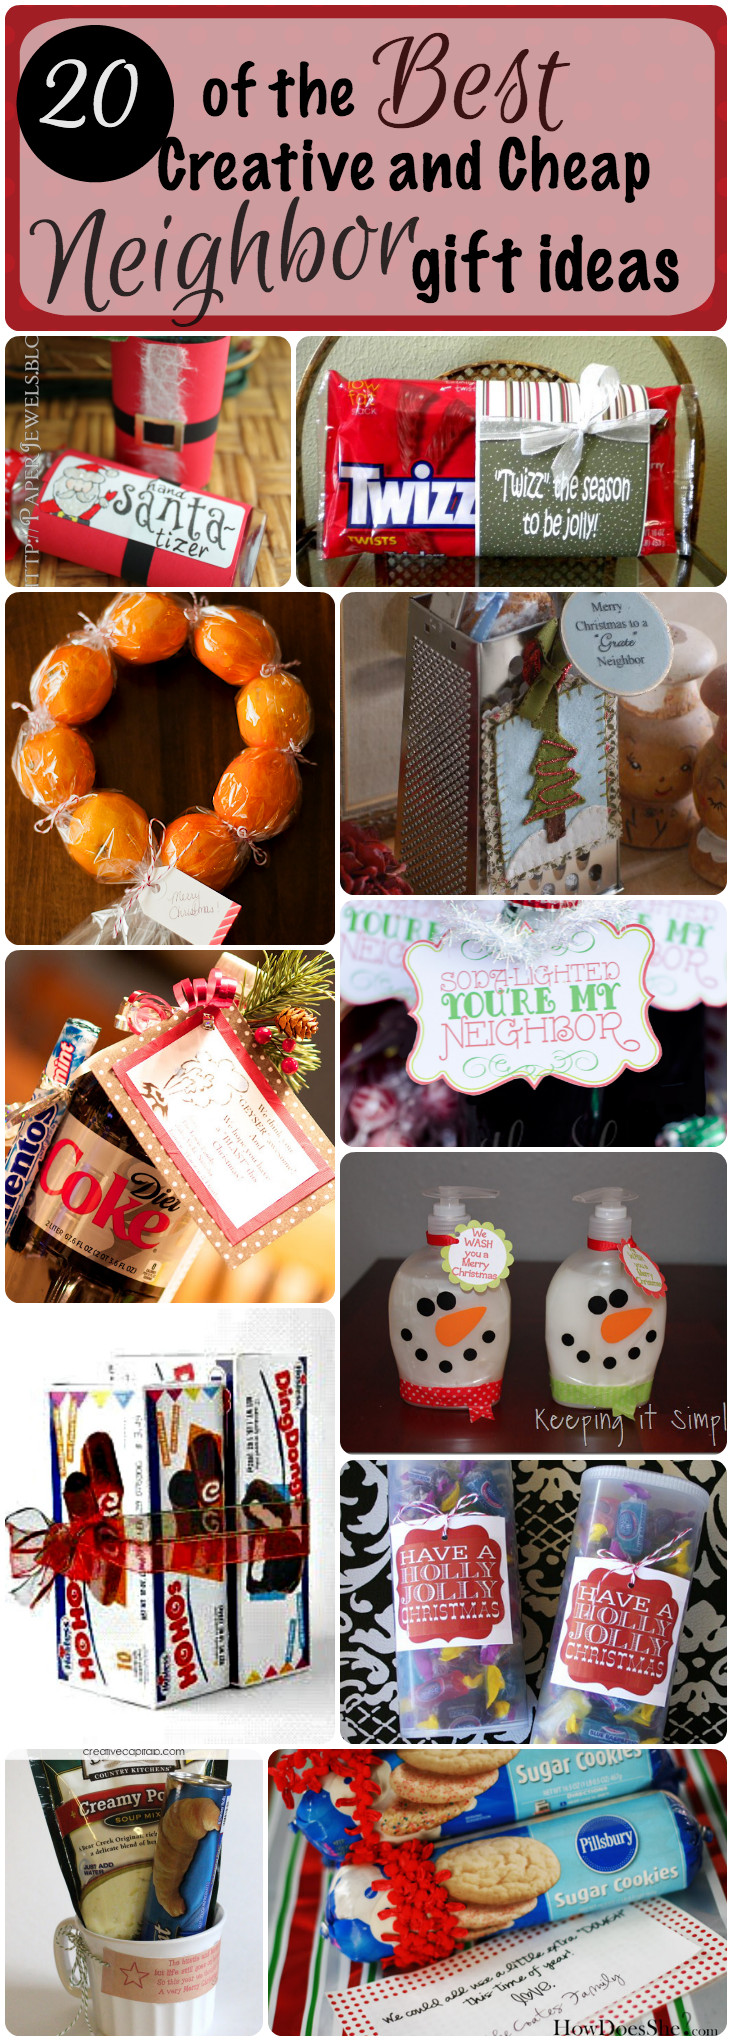 Cheap DIY Gifts
 20 of the Best Creative and Cheap Neighbor Gifts for Christmas